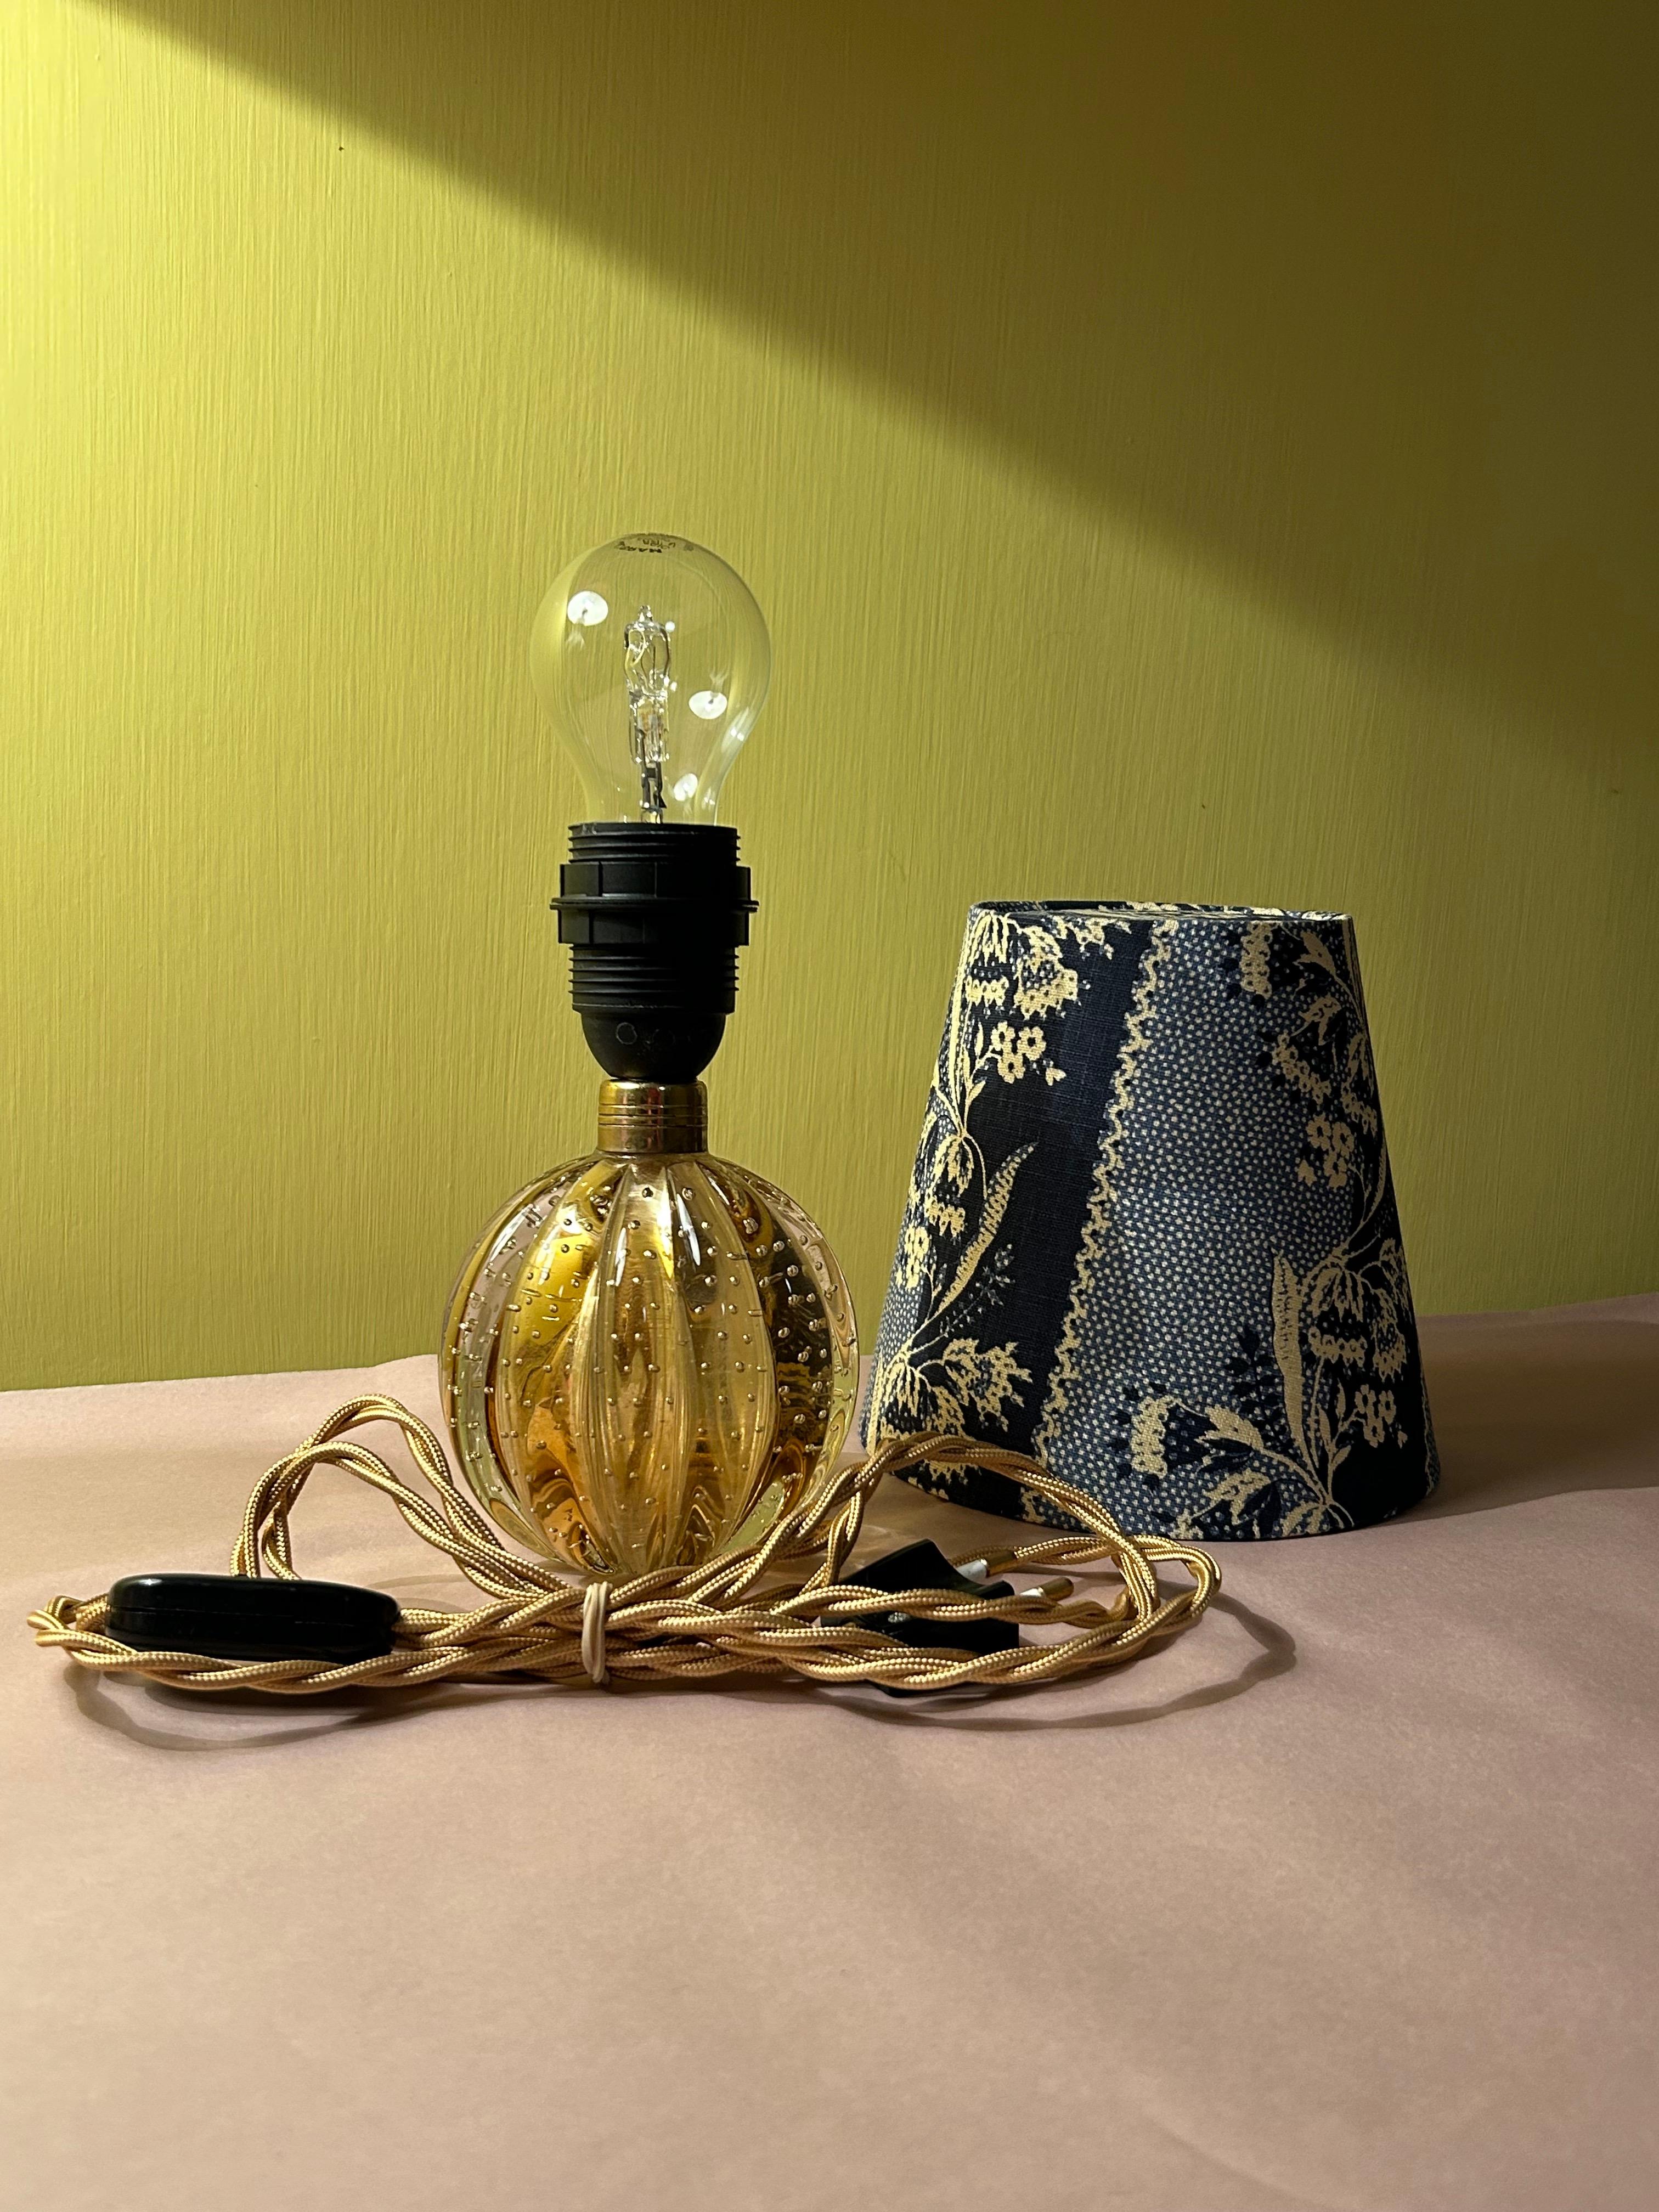 Vintage Amber Murano Table Lamp with Customized Blue Shade, Italy, 1950s For Sale 2